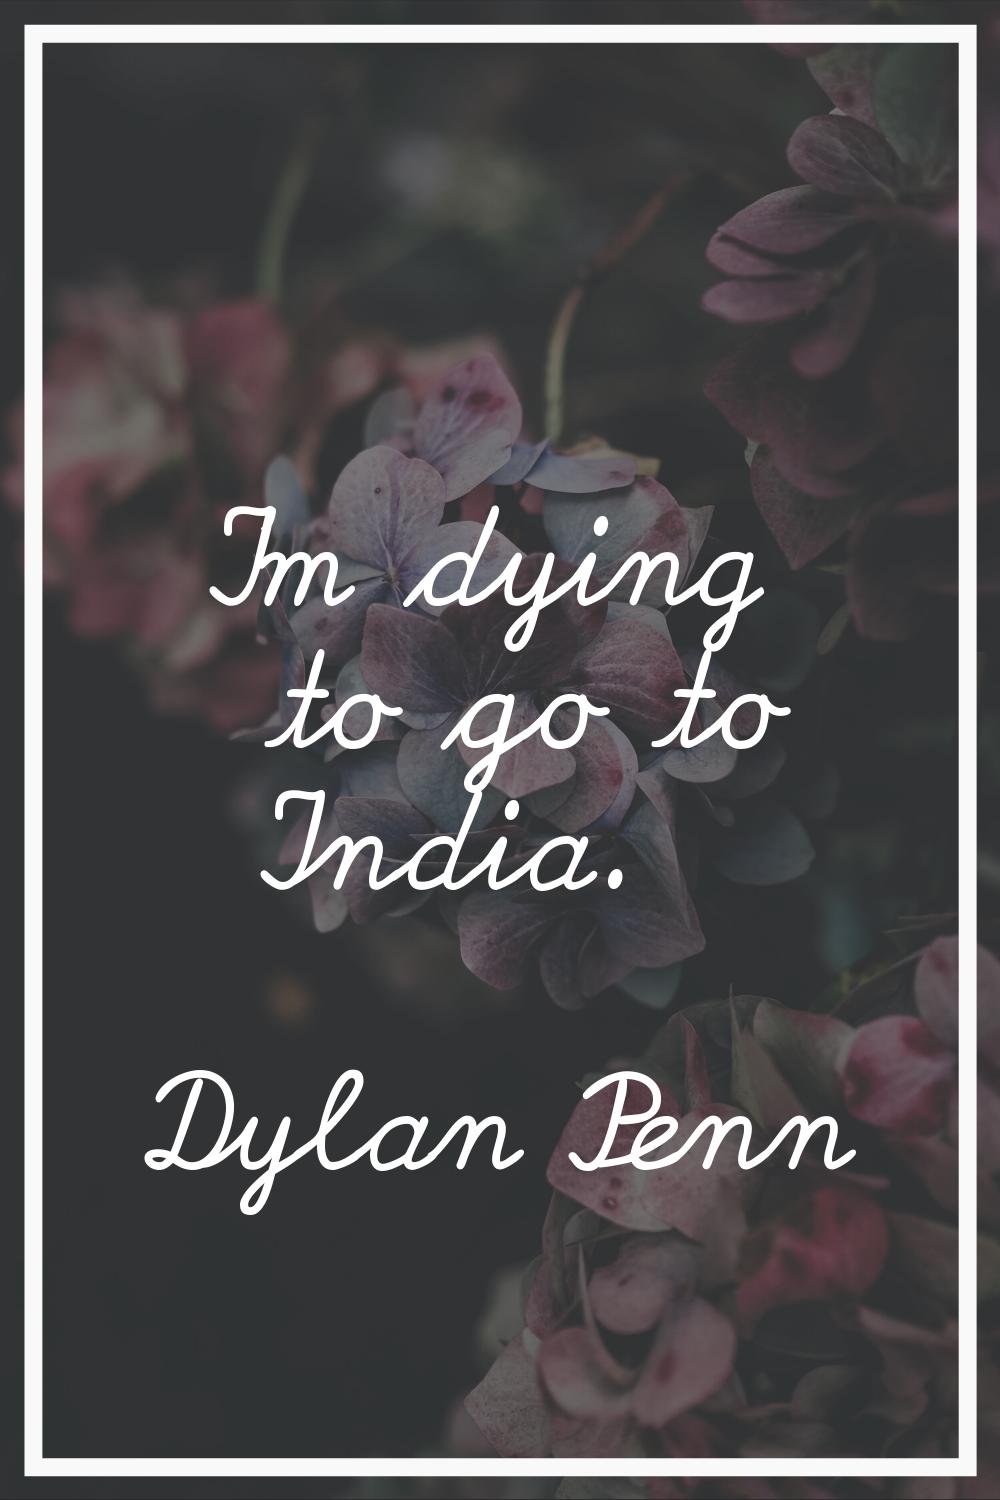 I'm dying to go to India.